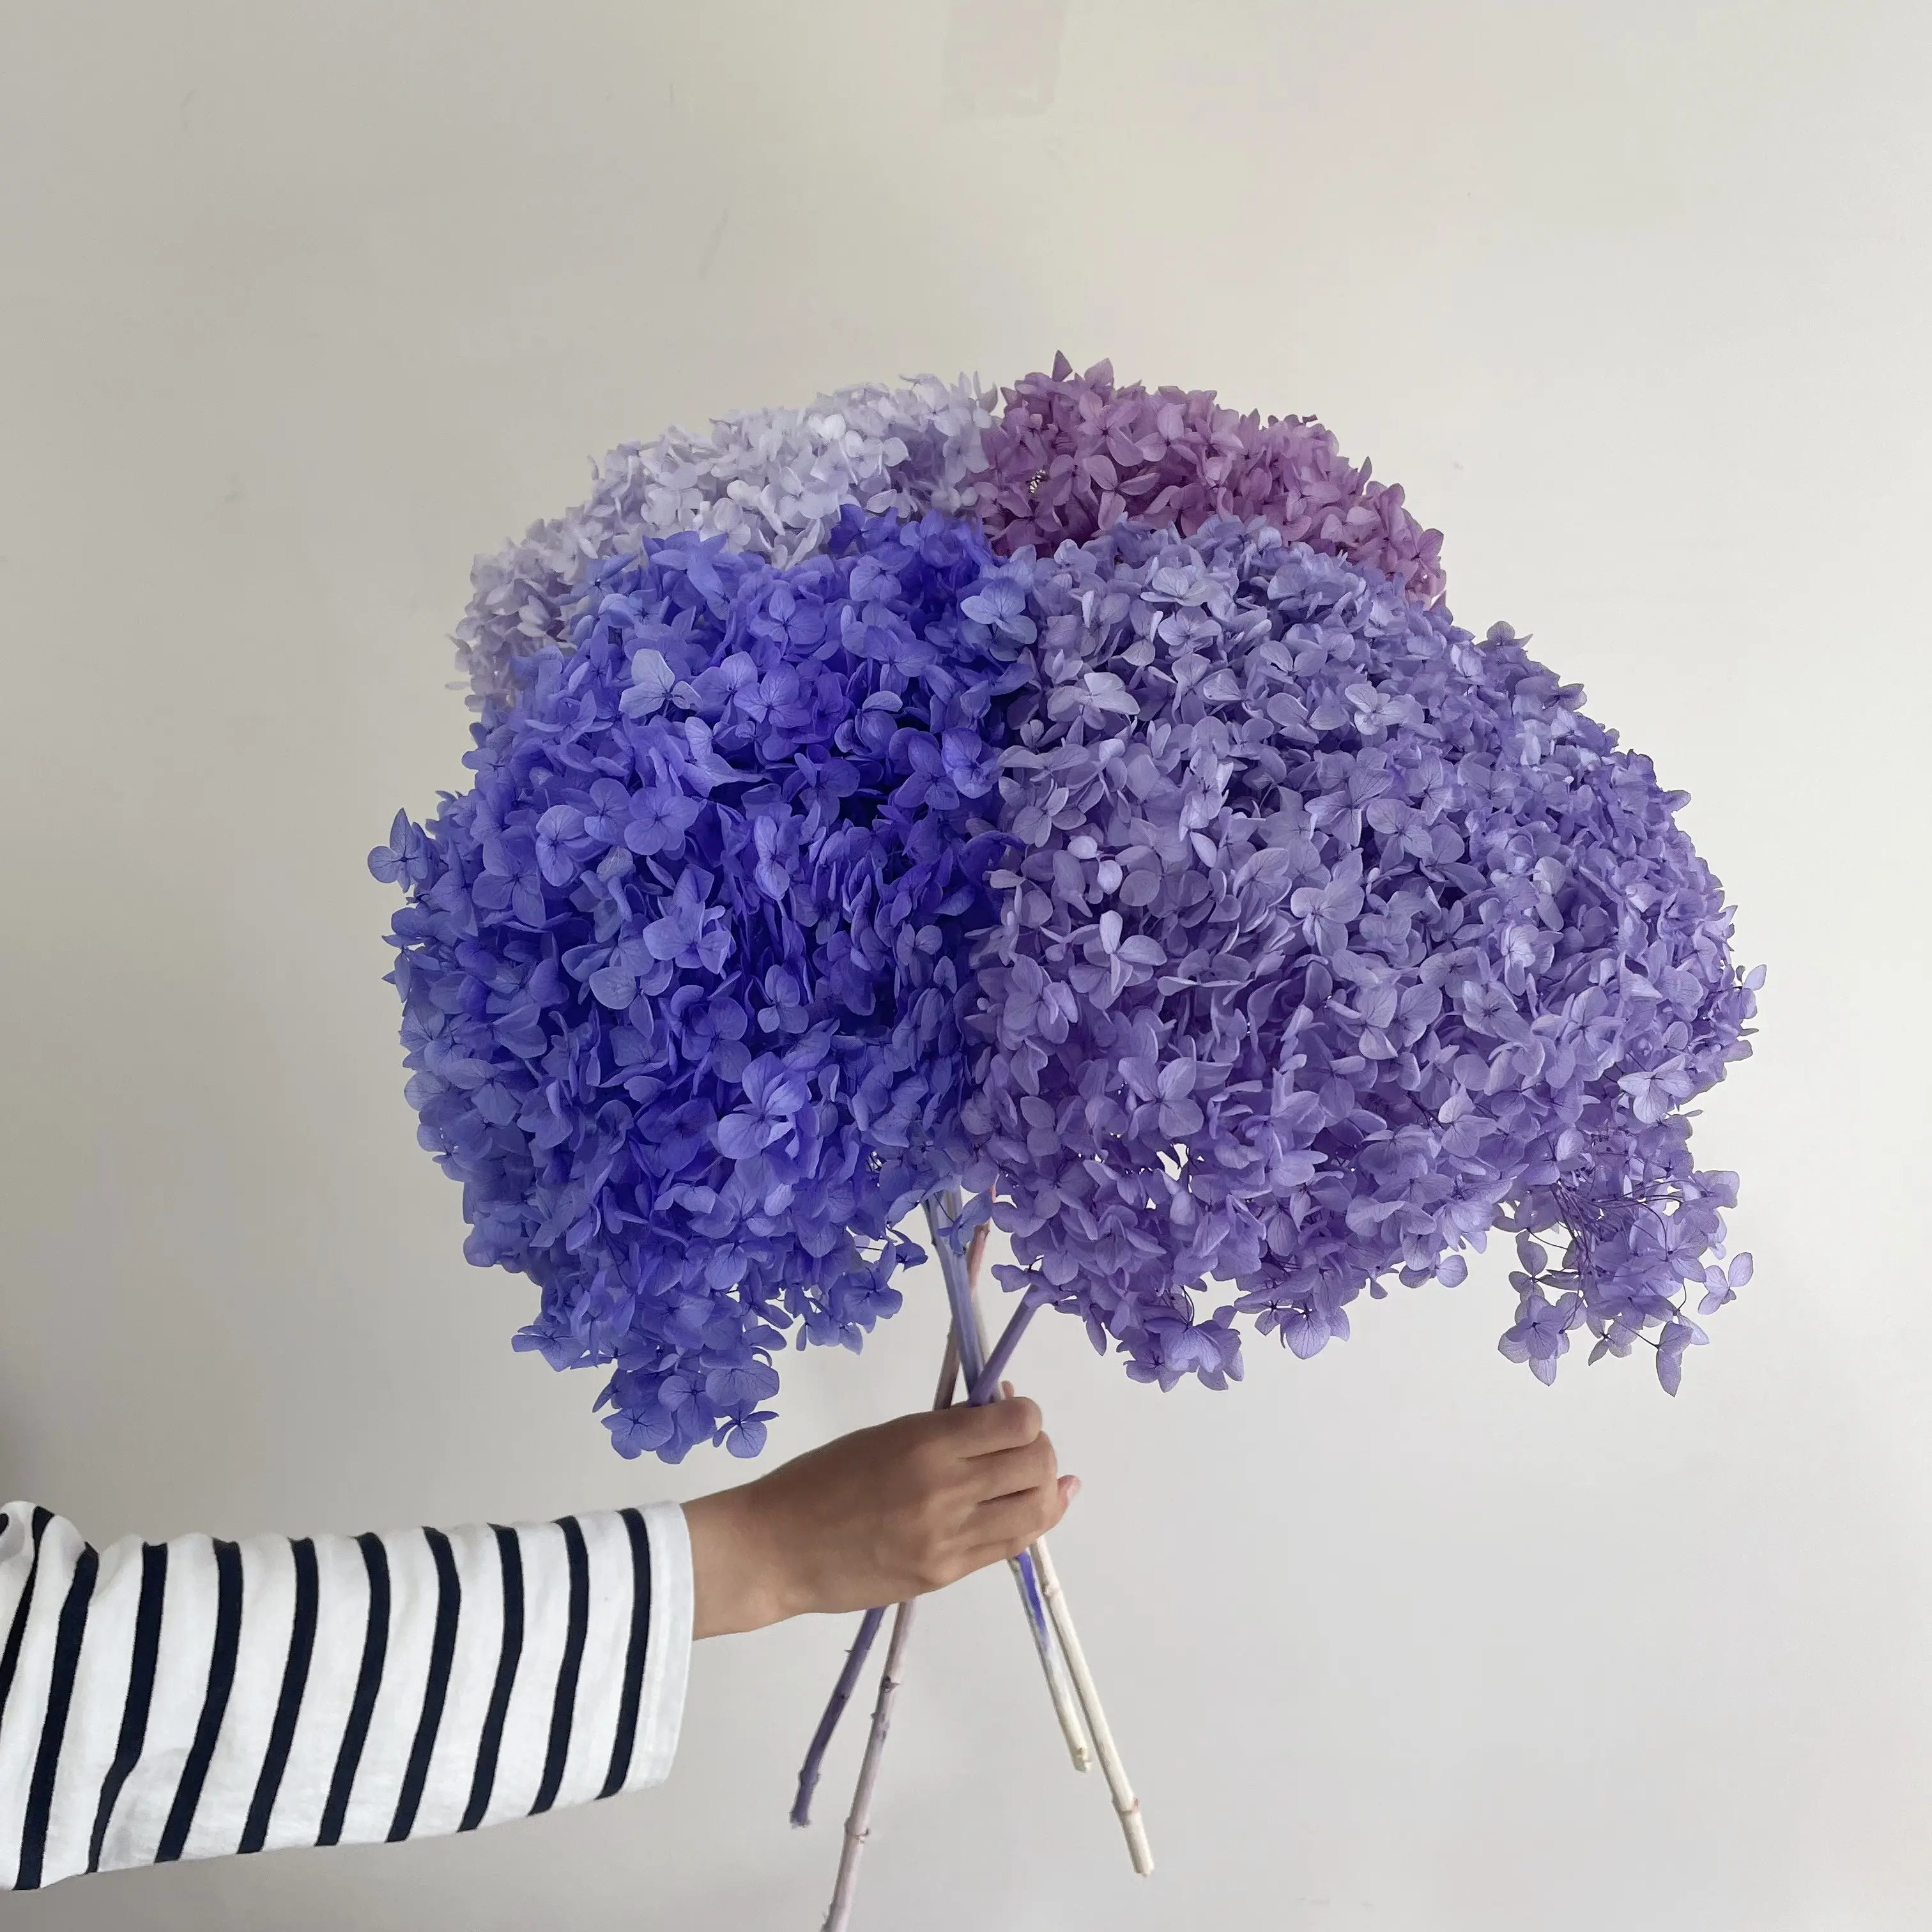 Wholesale Real Touch Dried Flowers Preserved Hydrangea Flowers with Stem for Wedding DecorationPopular